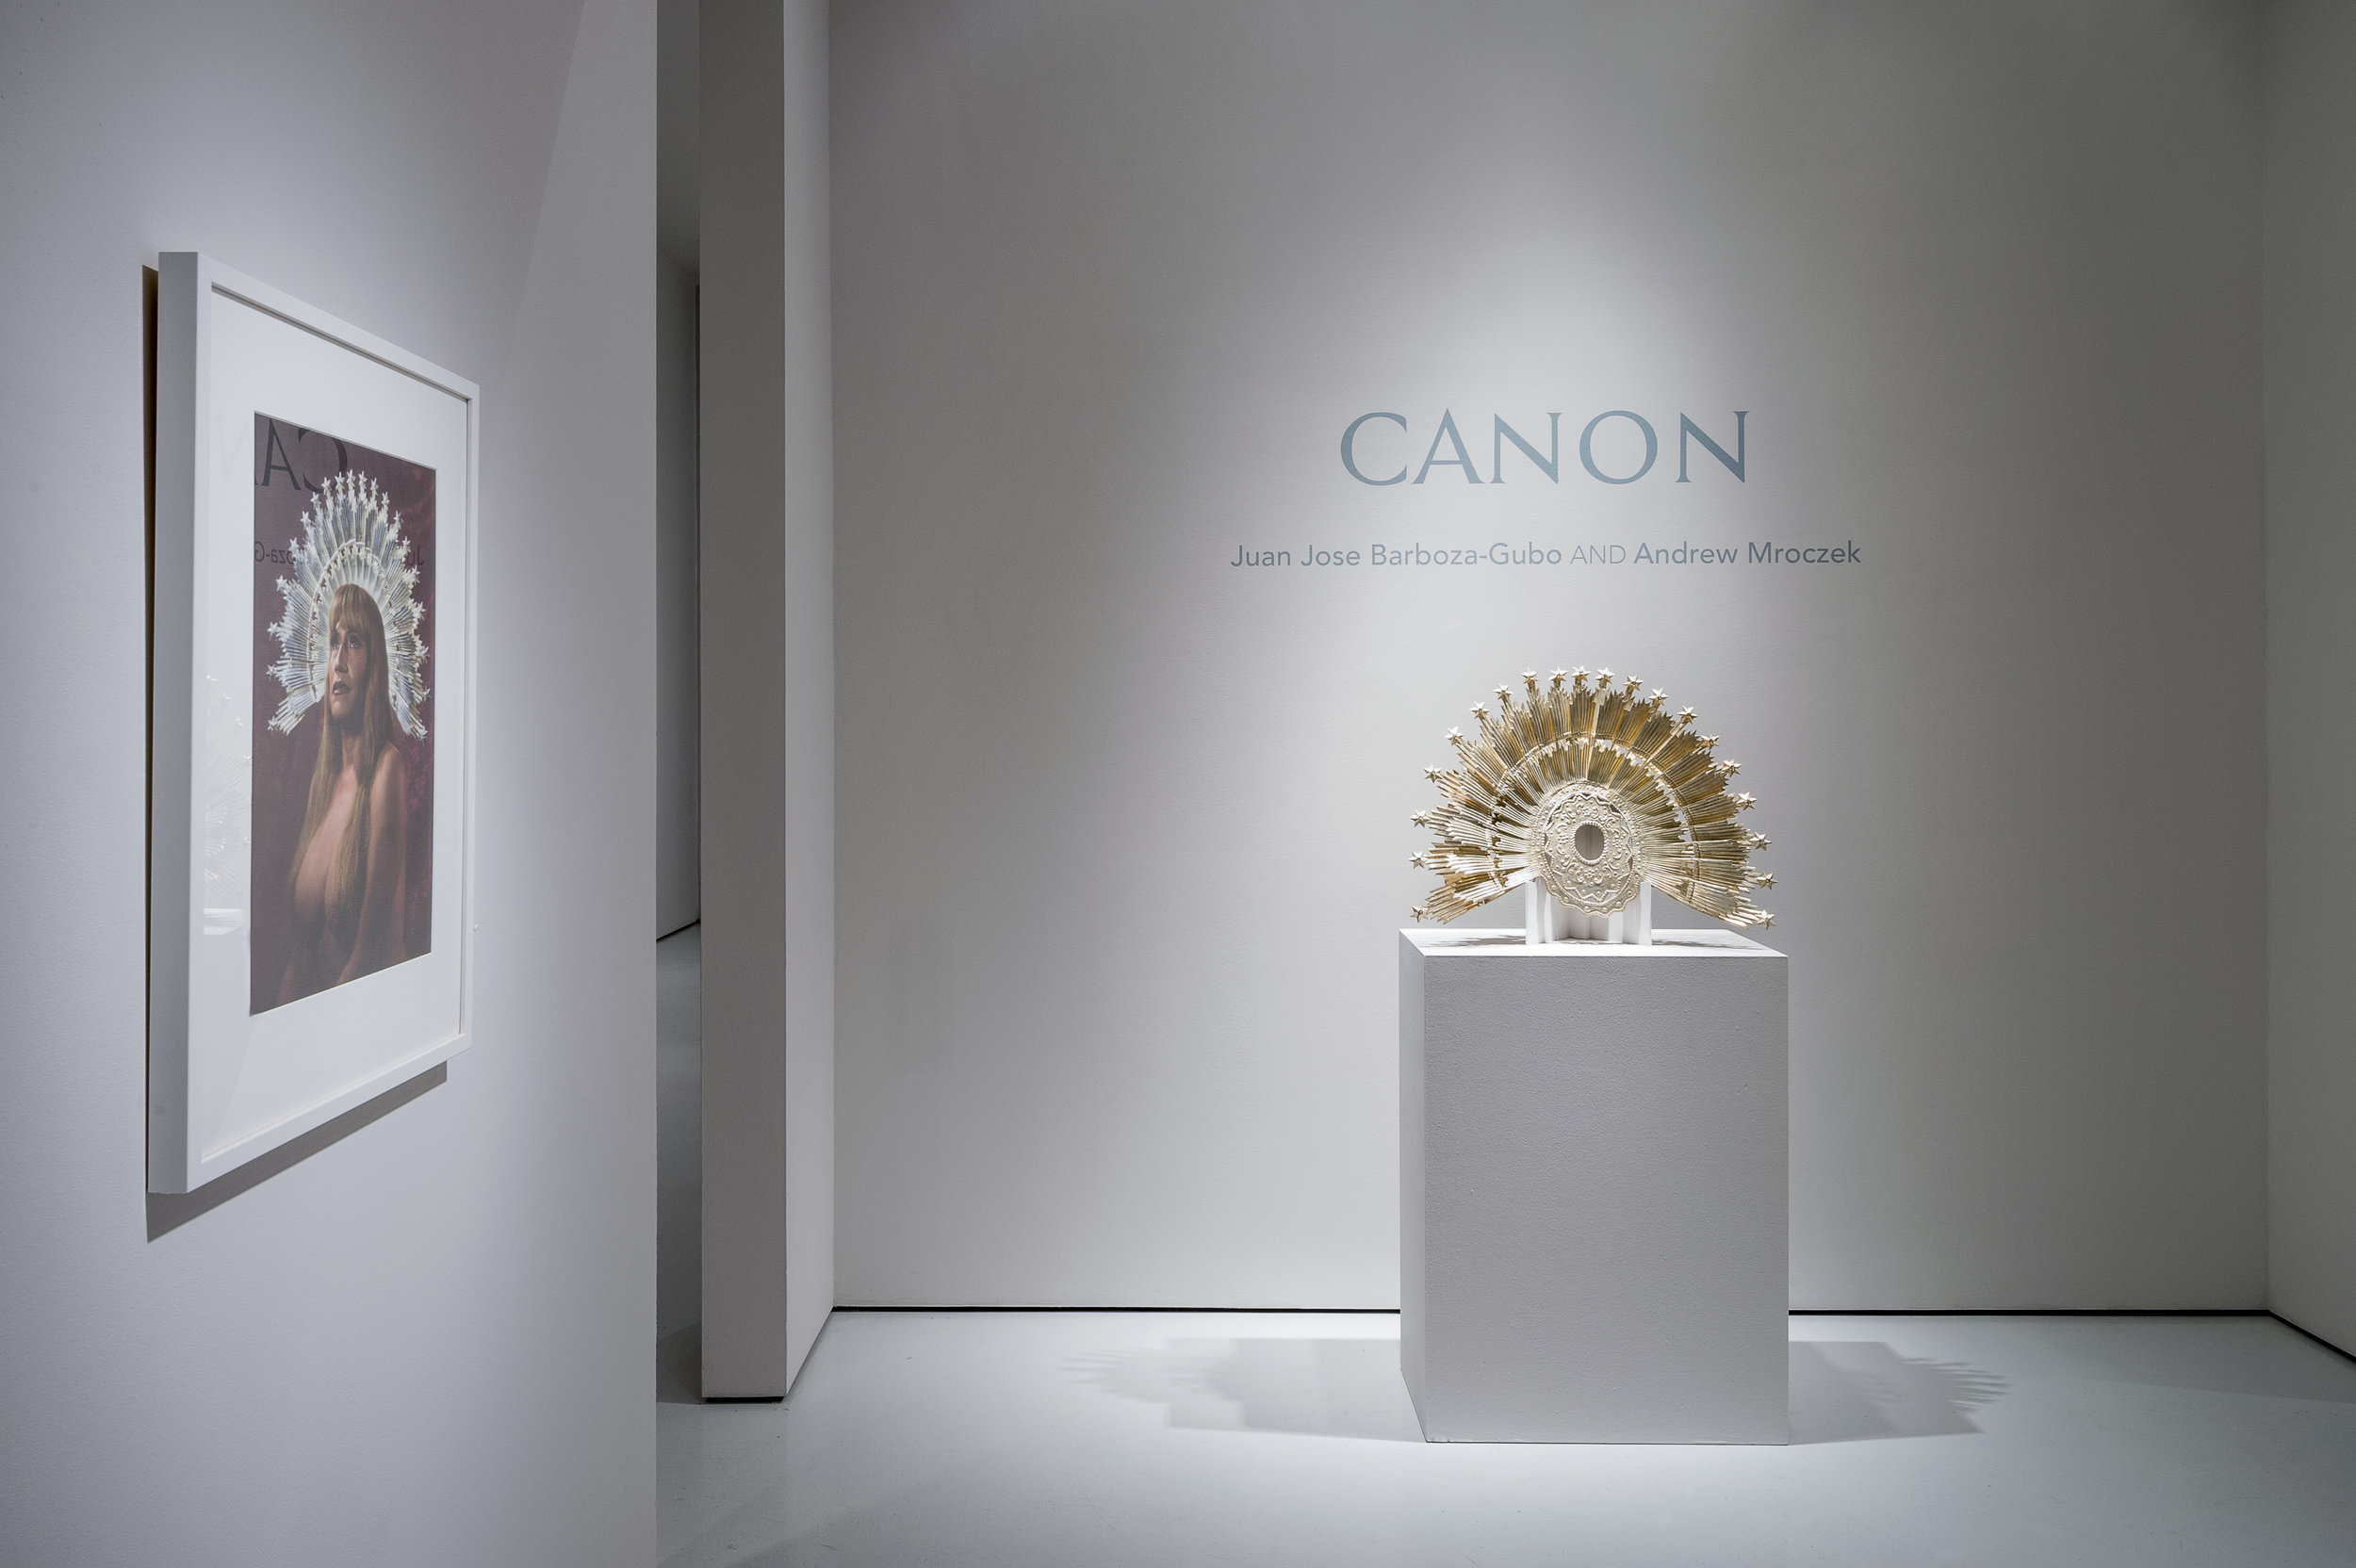  Installation view of "Canon" at the McClain Gallery, Houston, TX.&nbsp;(Photo Credit: Nash Baker) 